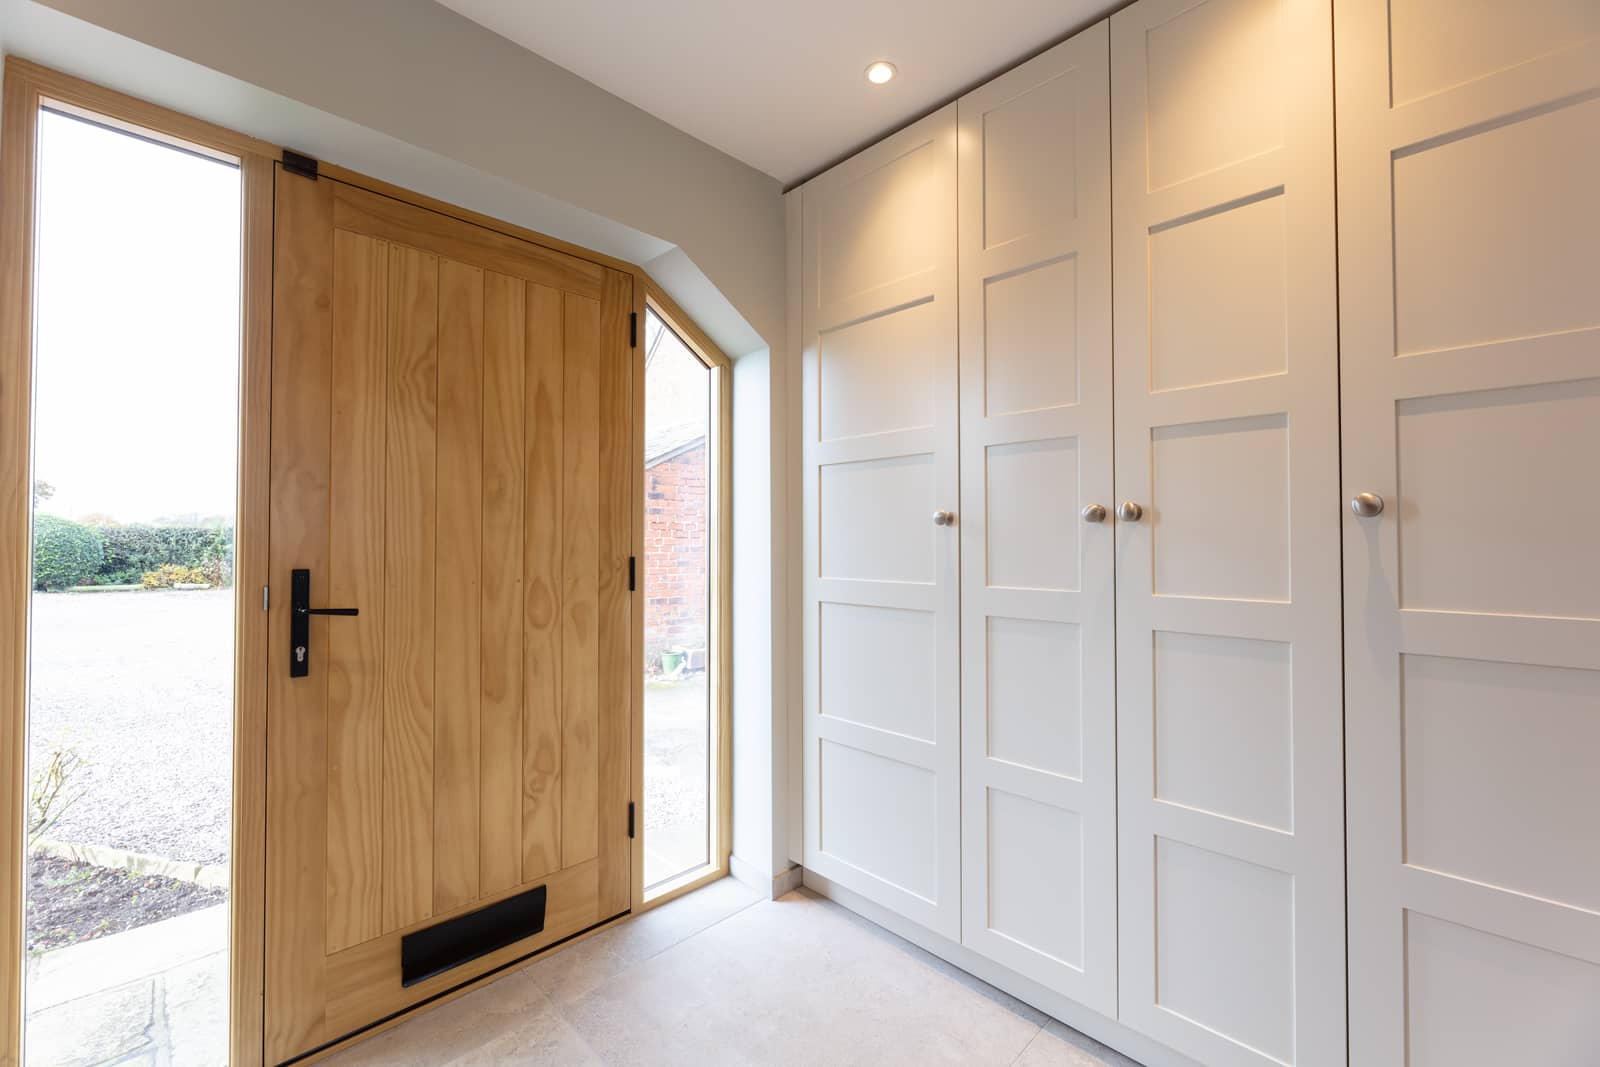 A hallway with a wooden door and white cupboards.